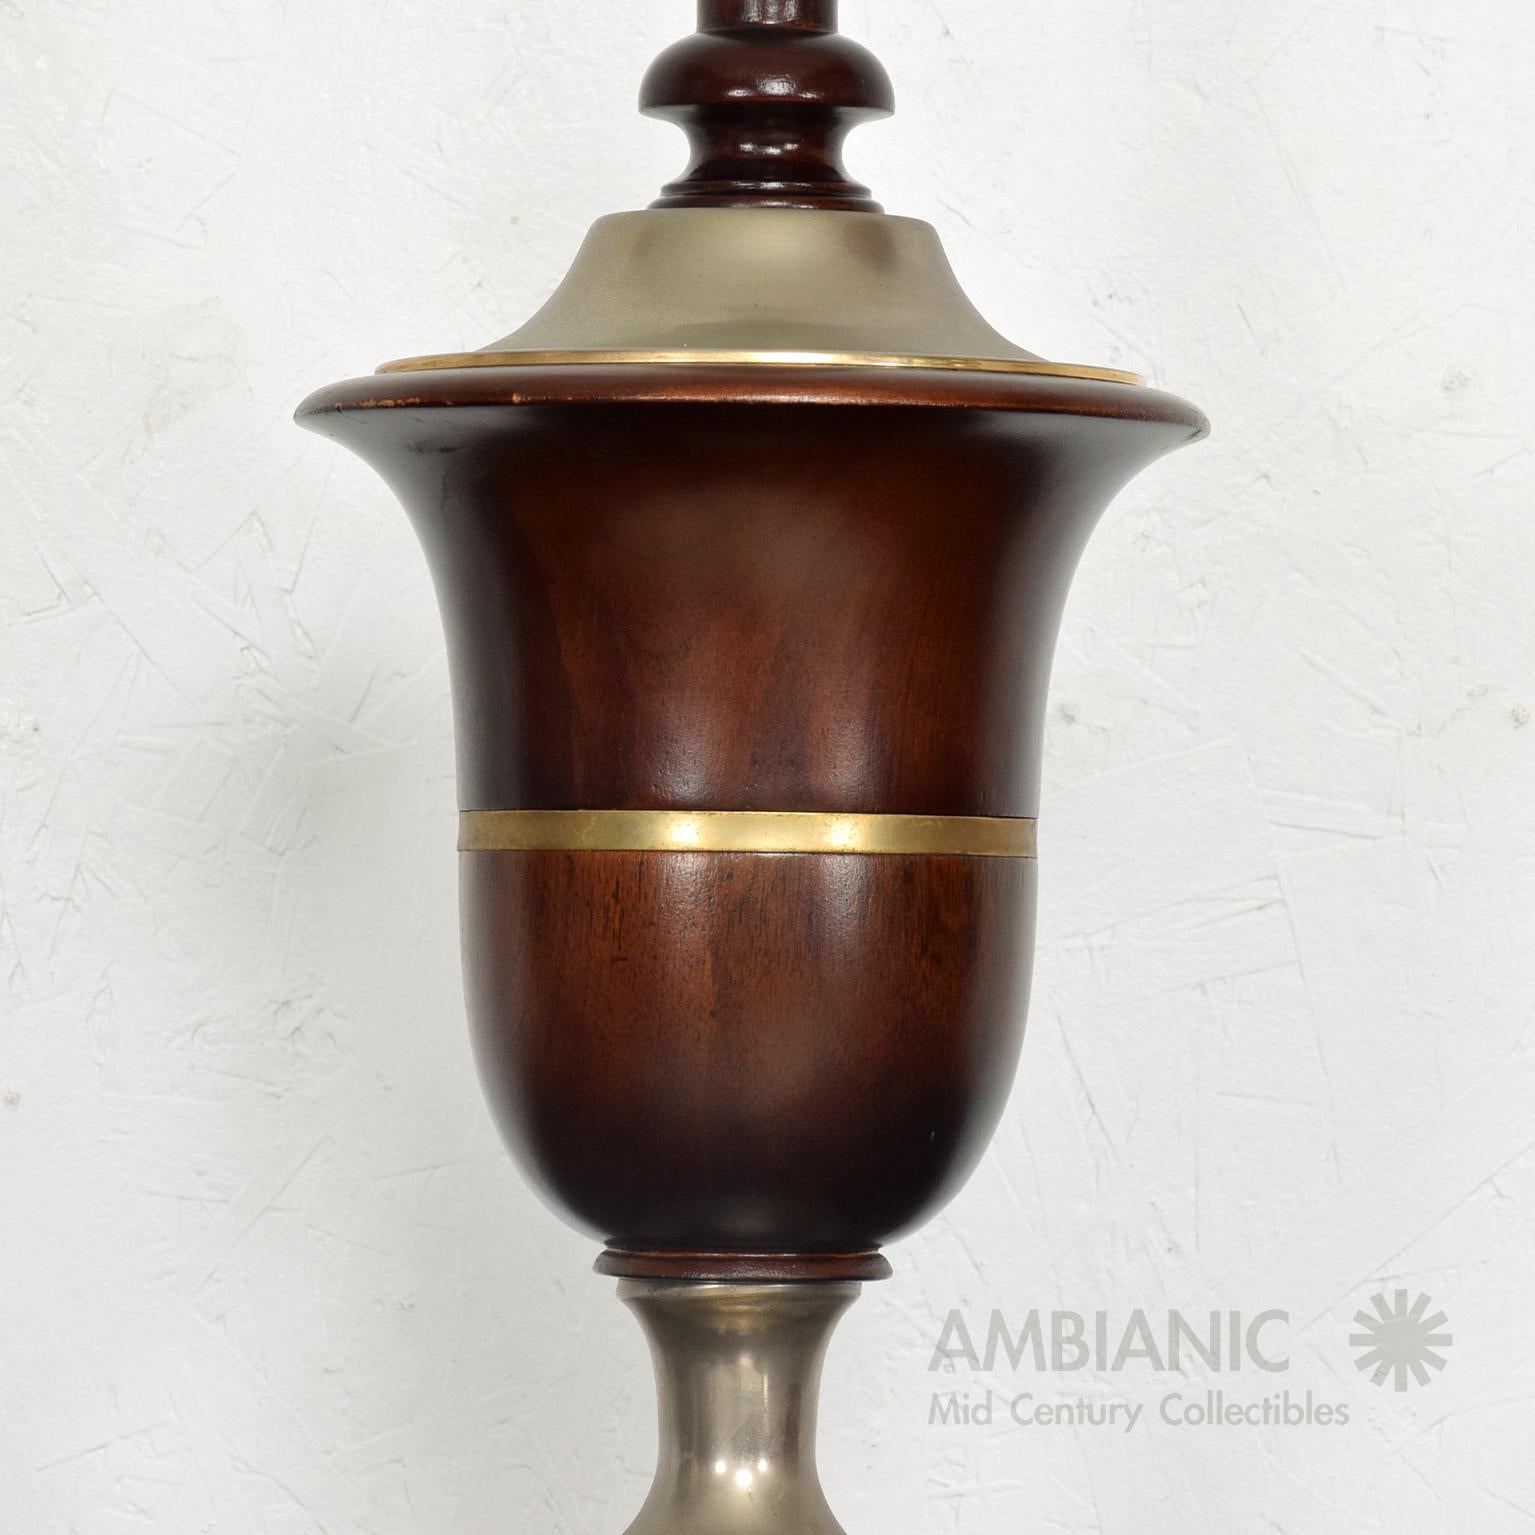 Mid-20th Century  Neoclassical Mahogany Adjustable Table Lamps Mexican Modern Luis Barragan 1940s